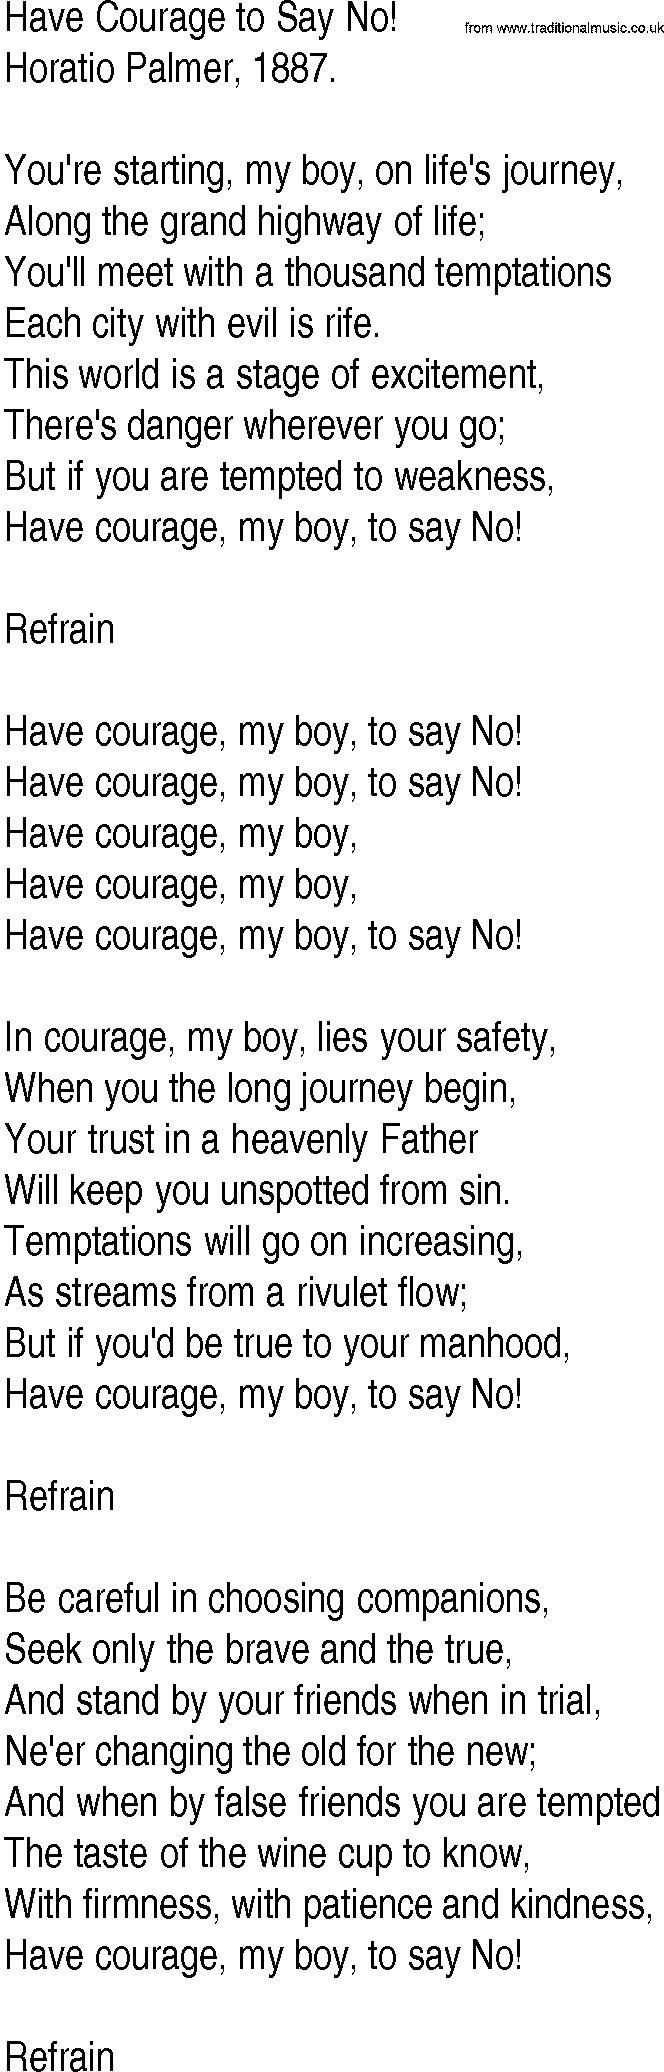 Hymn and Gospel Song: Have Courage to Say No! by Horatio Palmer lyrics